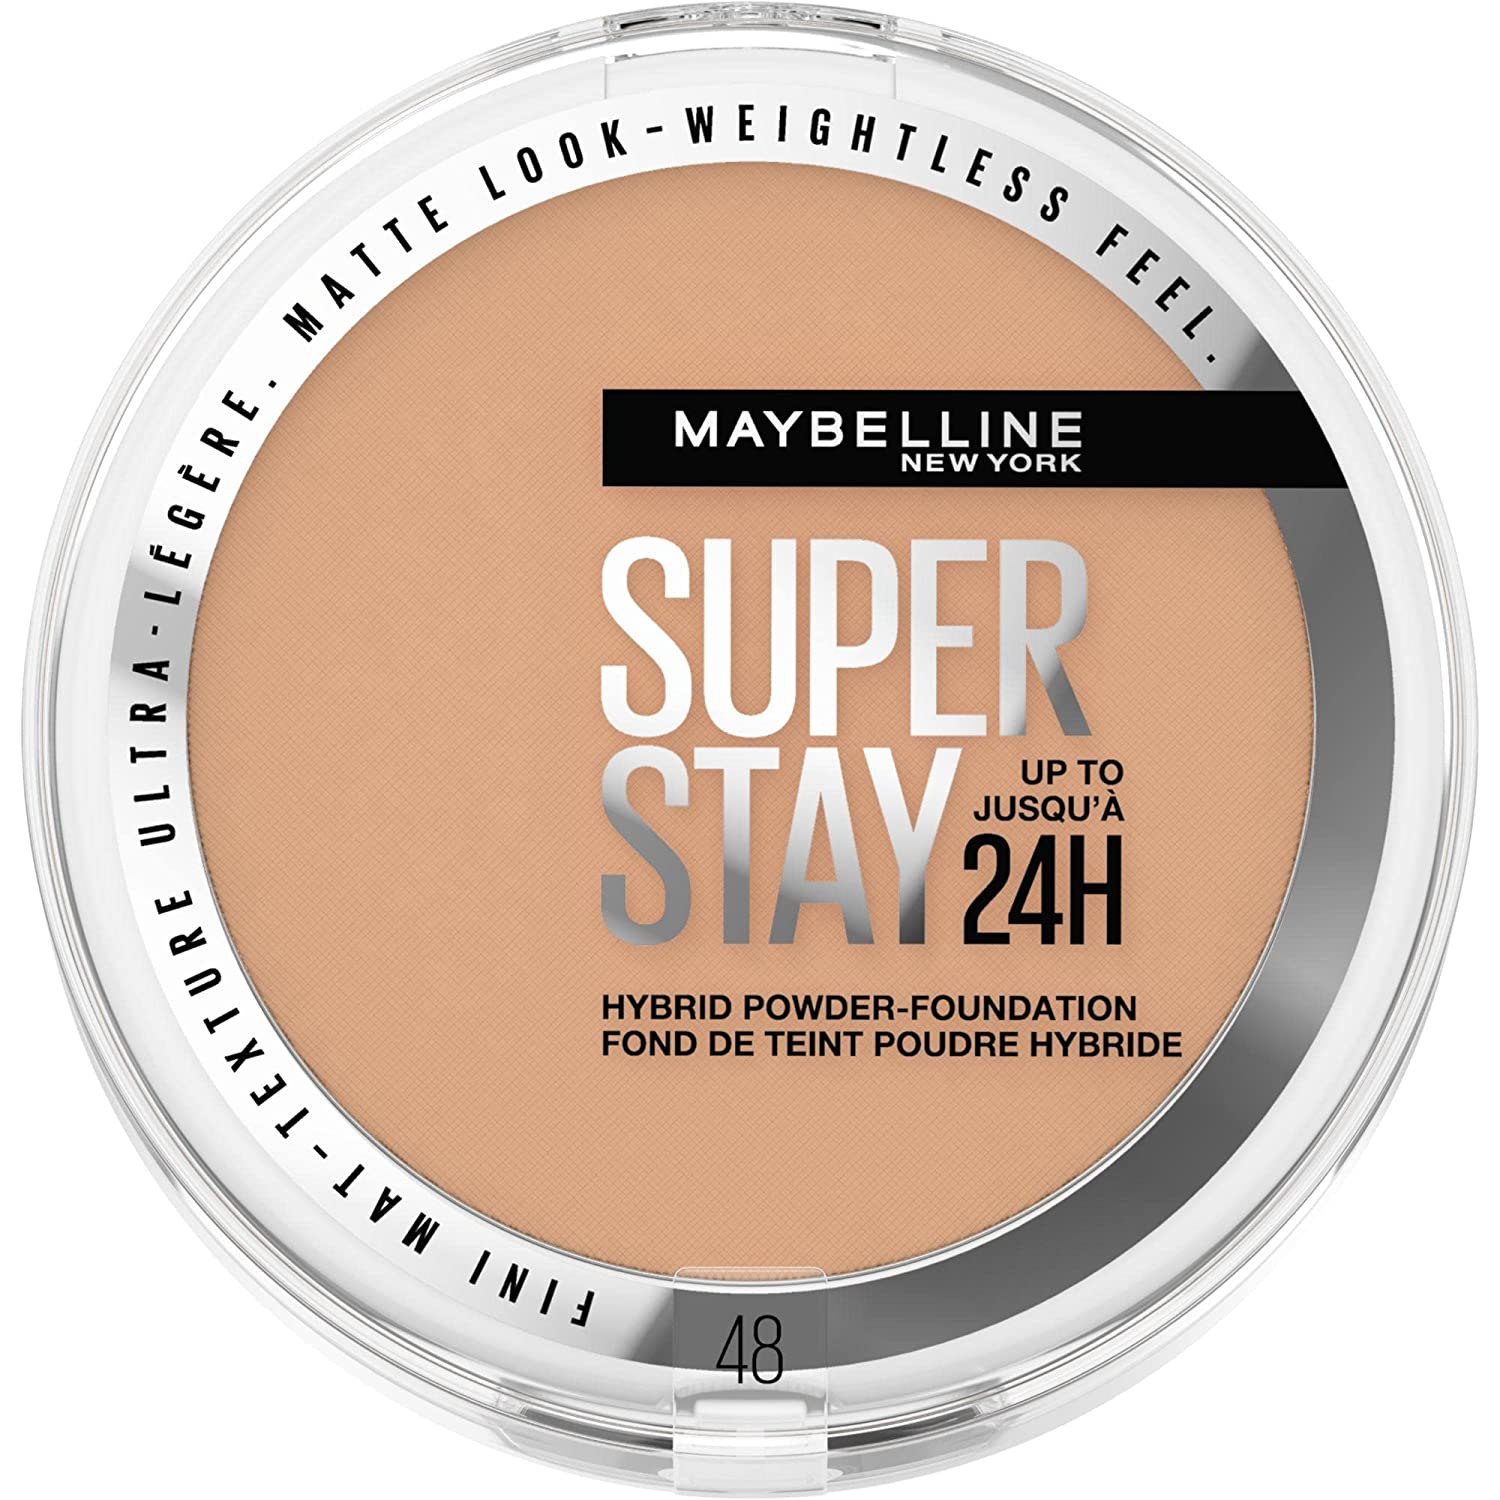 Maybelline New York Powder Make-Up, Waterproof and Matte with High Coverage, Super Stay Hybrid Powder Foundation, #48, 1 Piece, ‎no.48